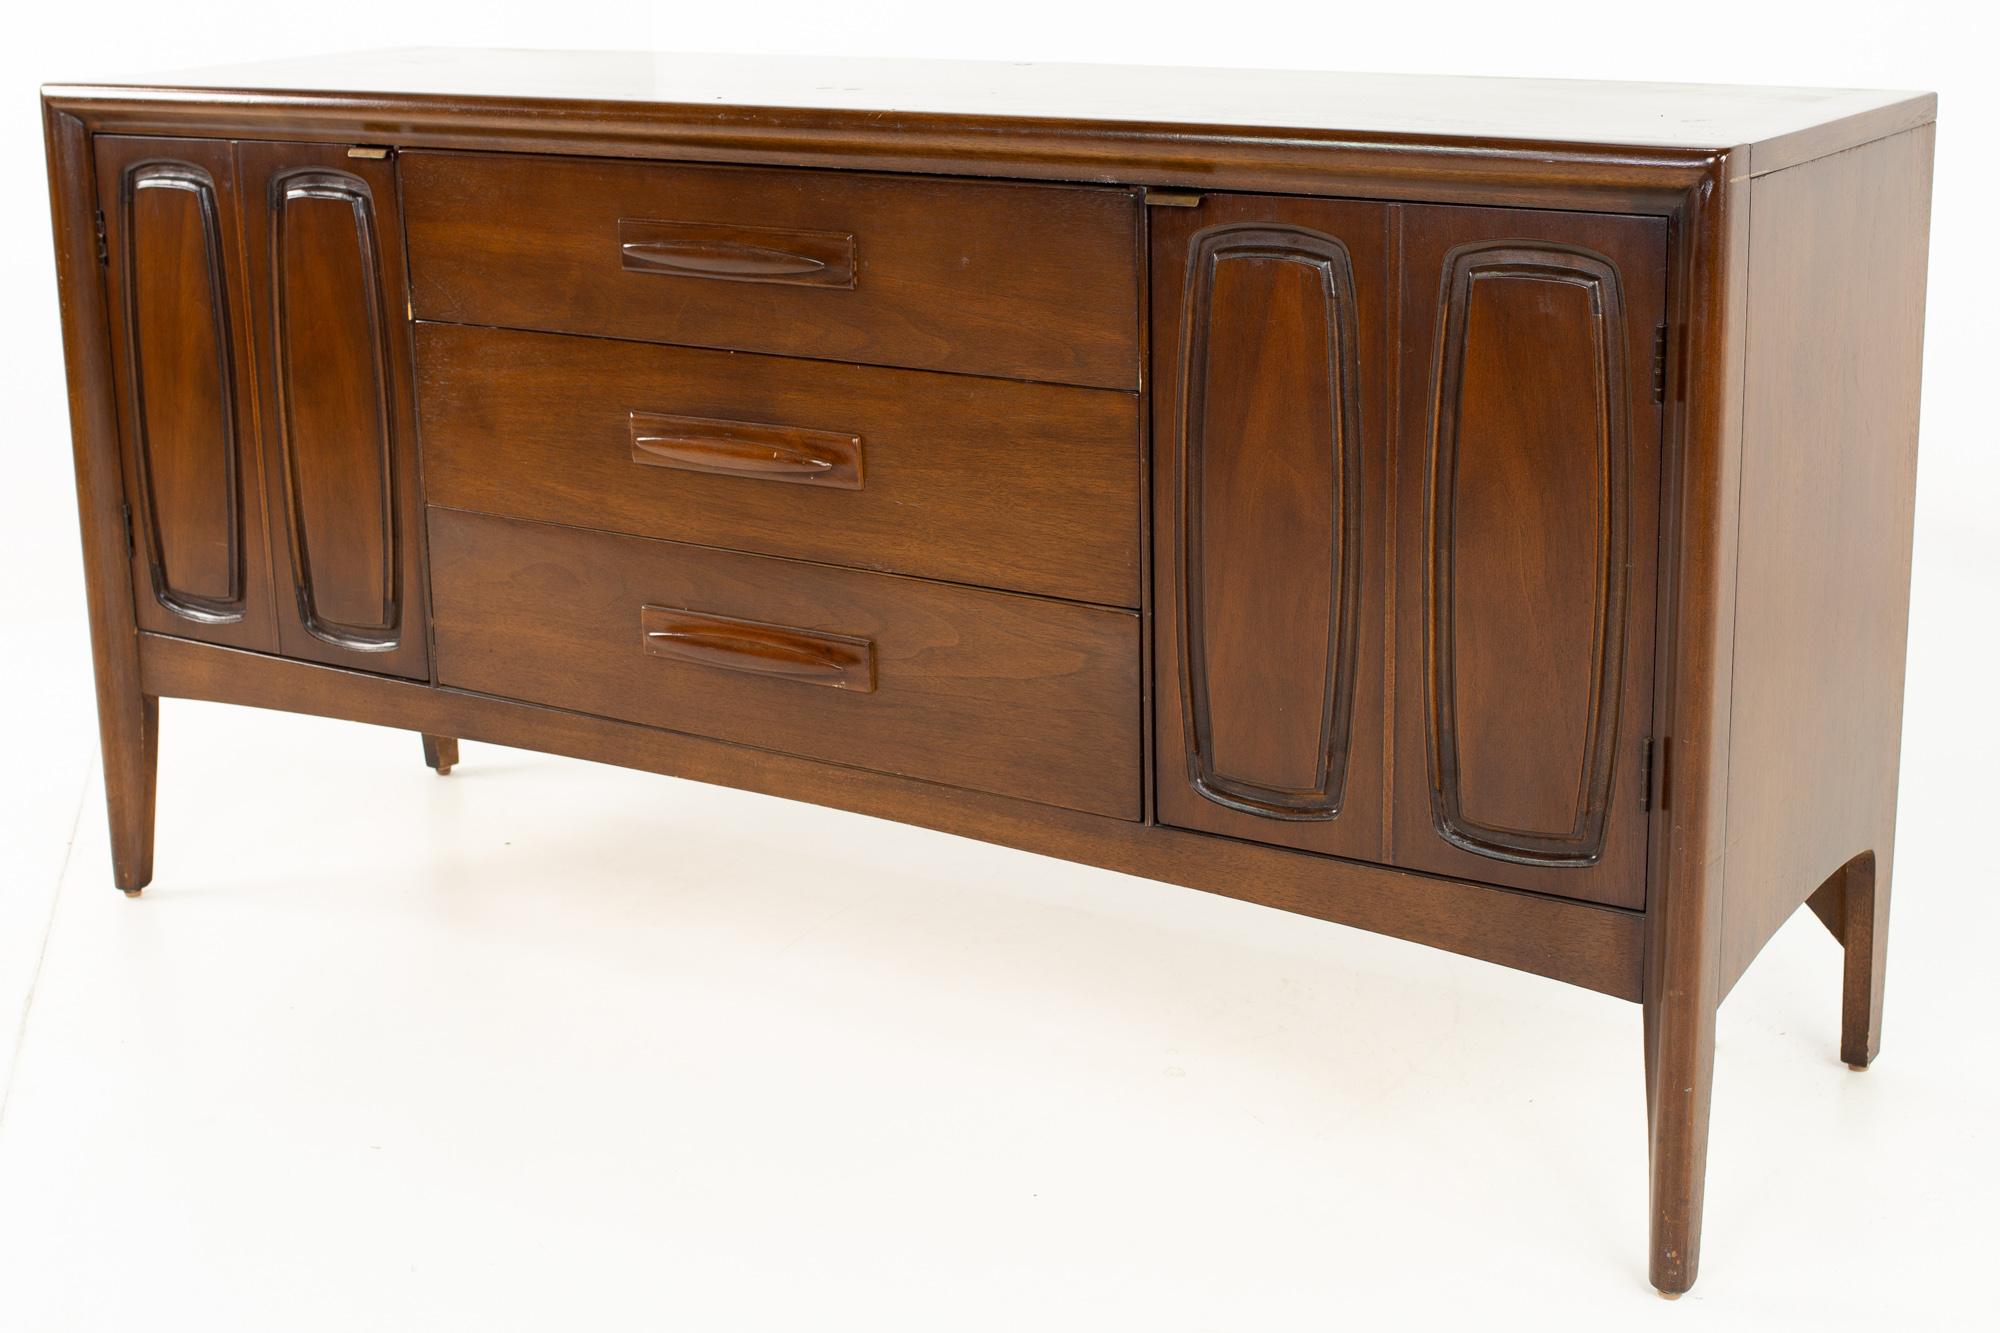 Restored Broyhill emphasis midcentury walnut 9 drawer lowboy dresser credenza
Dresser is: 72 wide x 19 deep x 30.5 high

All pieces of furniture can be had in what we call restored vintage condition. That means the piece is restored upon purchase